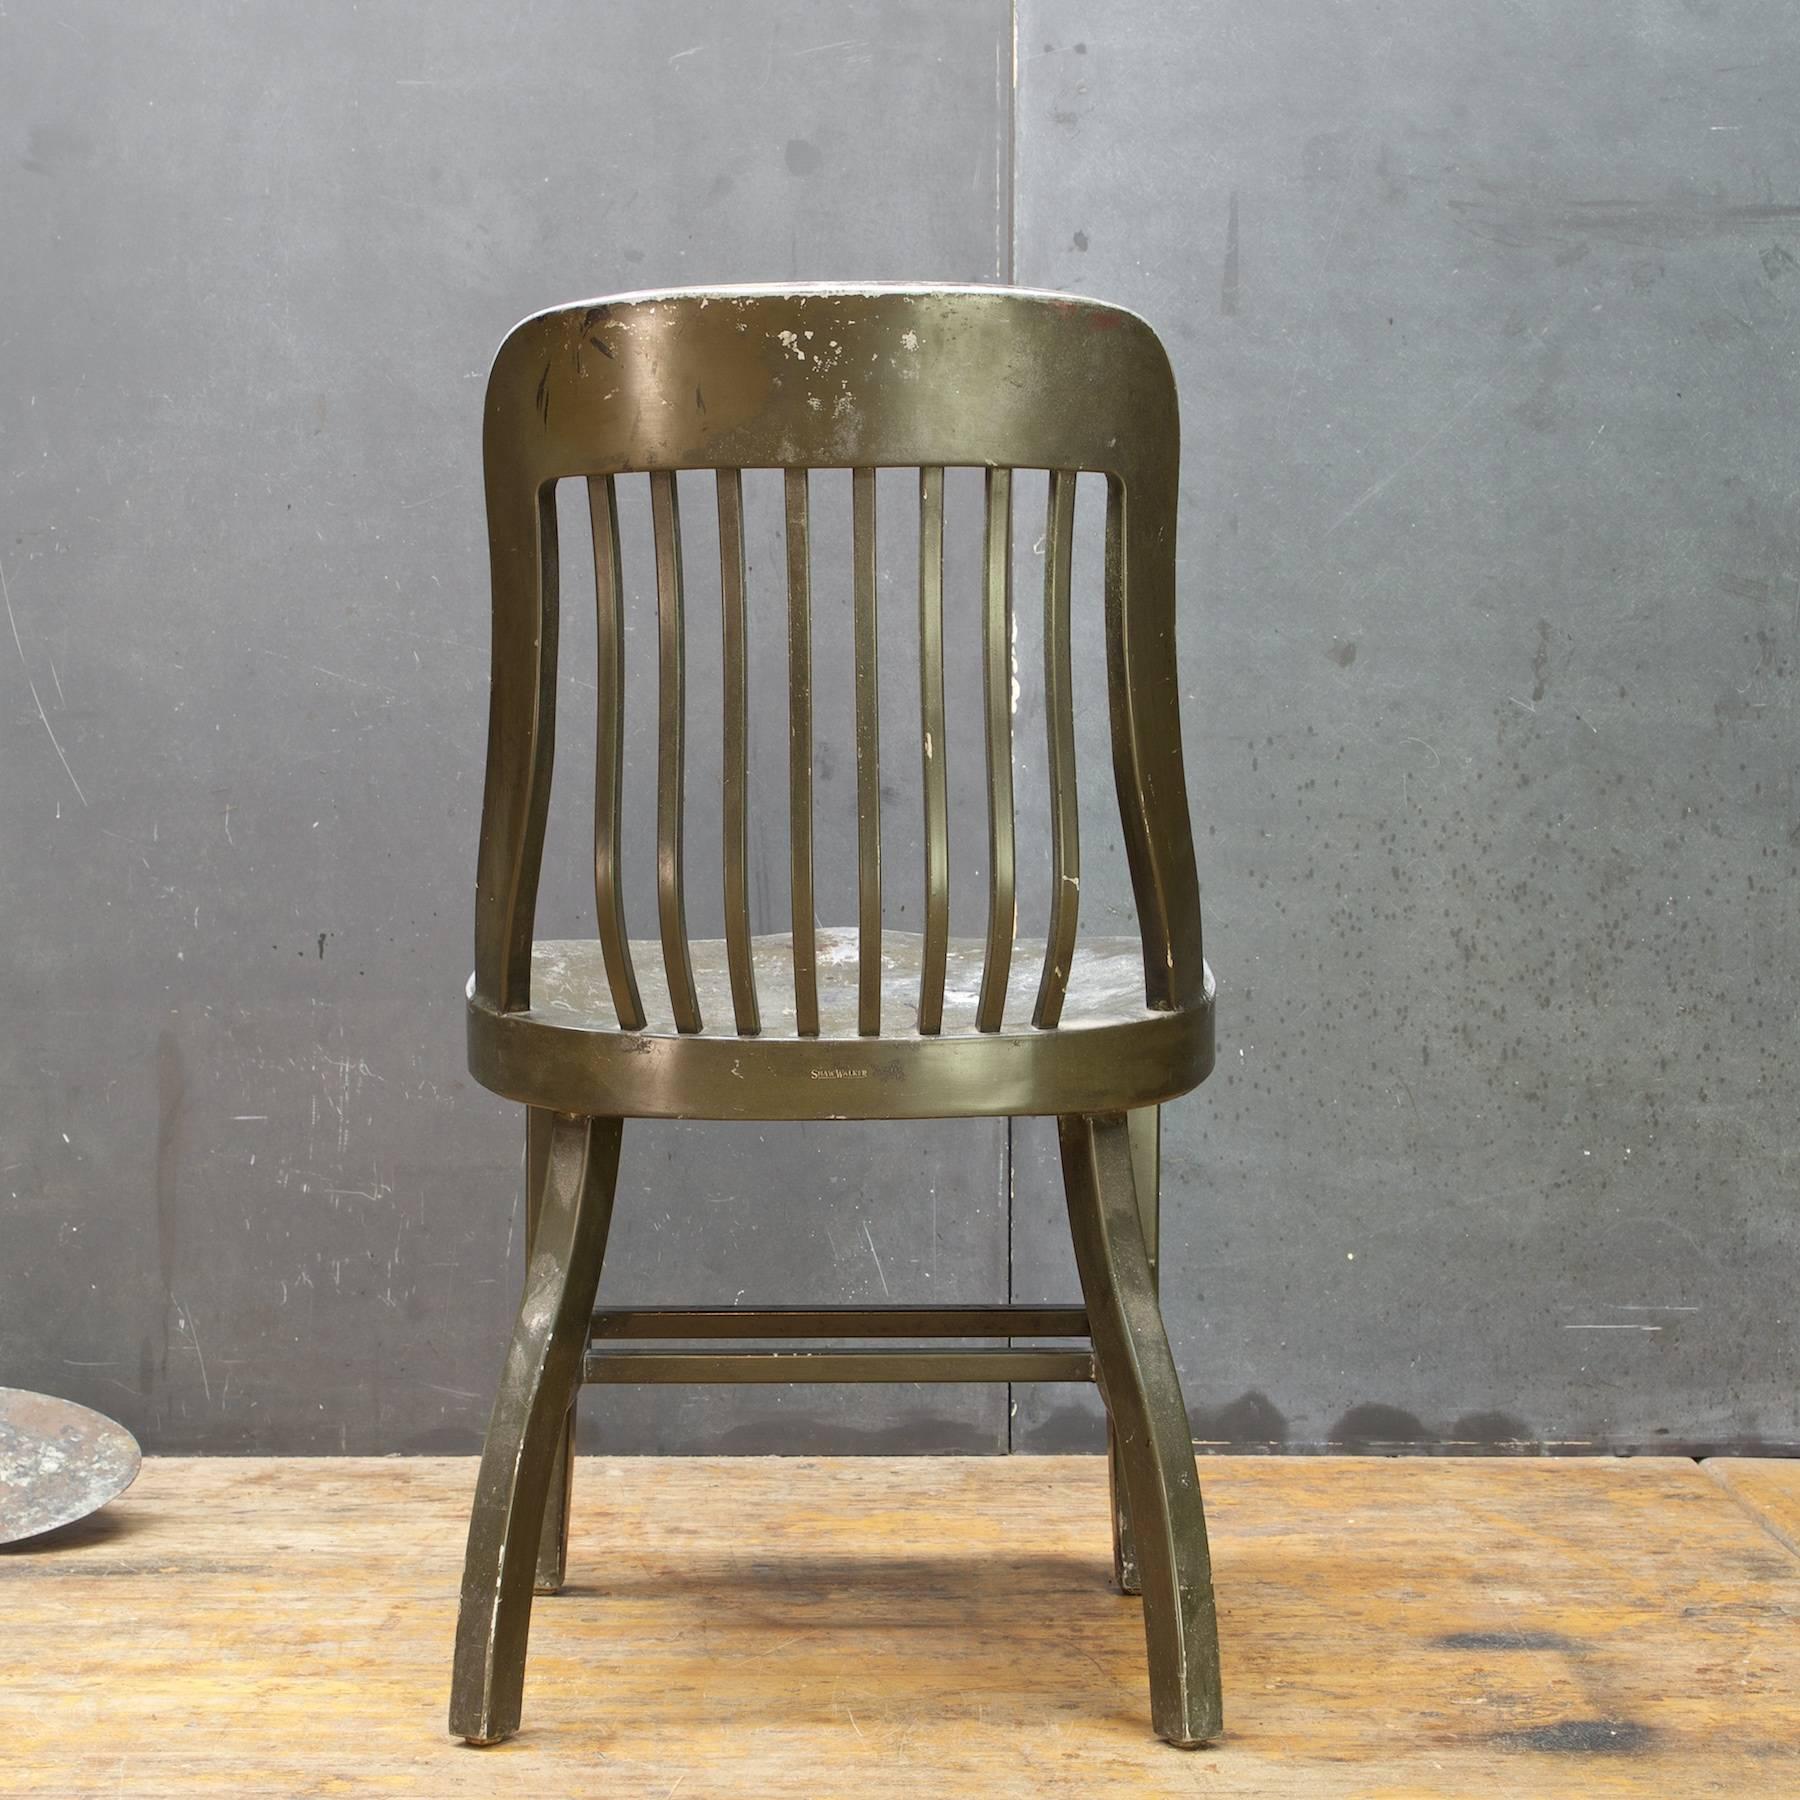 Art Deco 1930s US Barracks Metal Early Goodform Chair by General Fireproofing